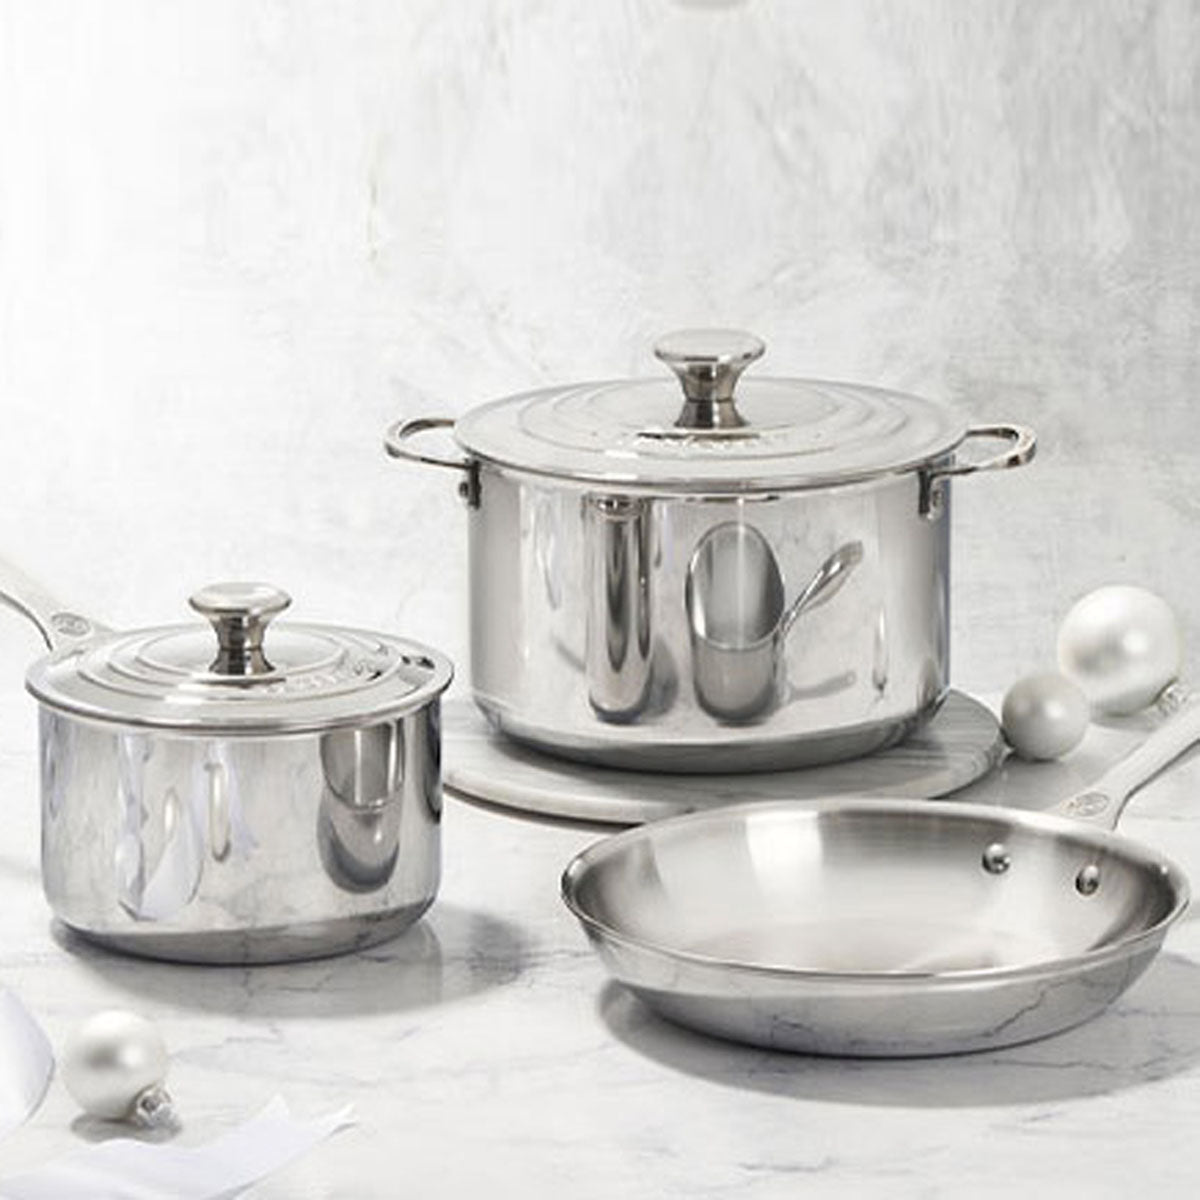 LE CREUSET STAINLESS STEEL